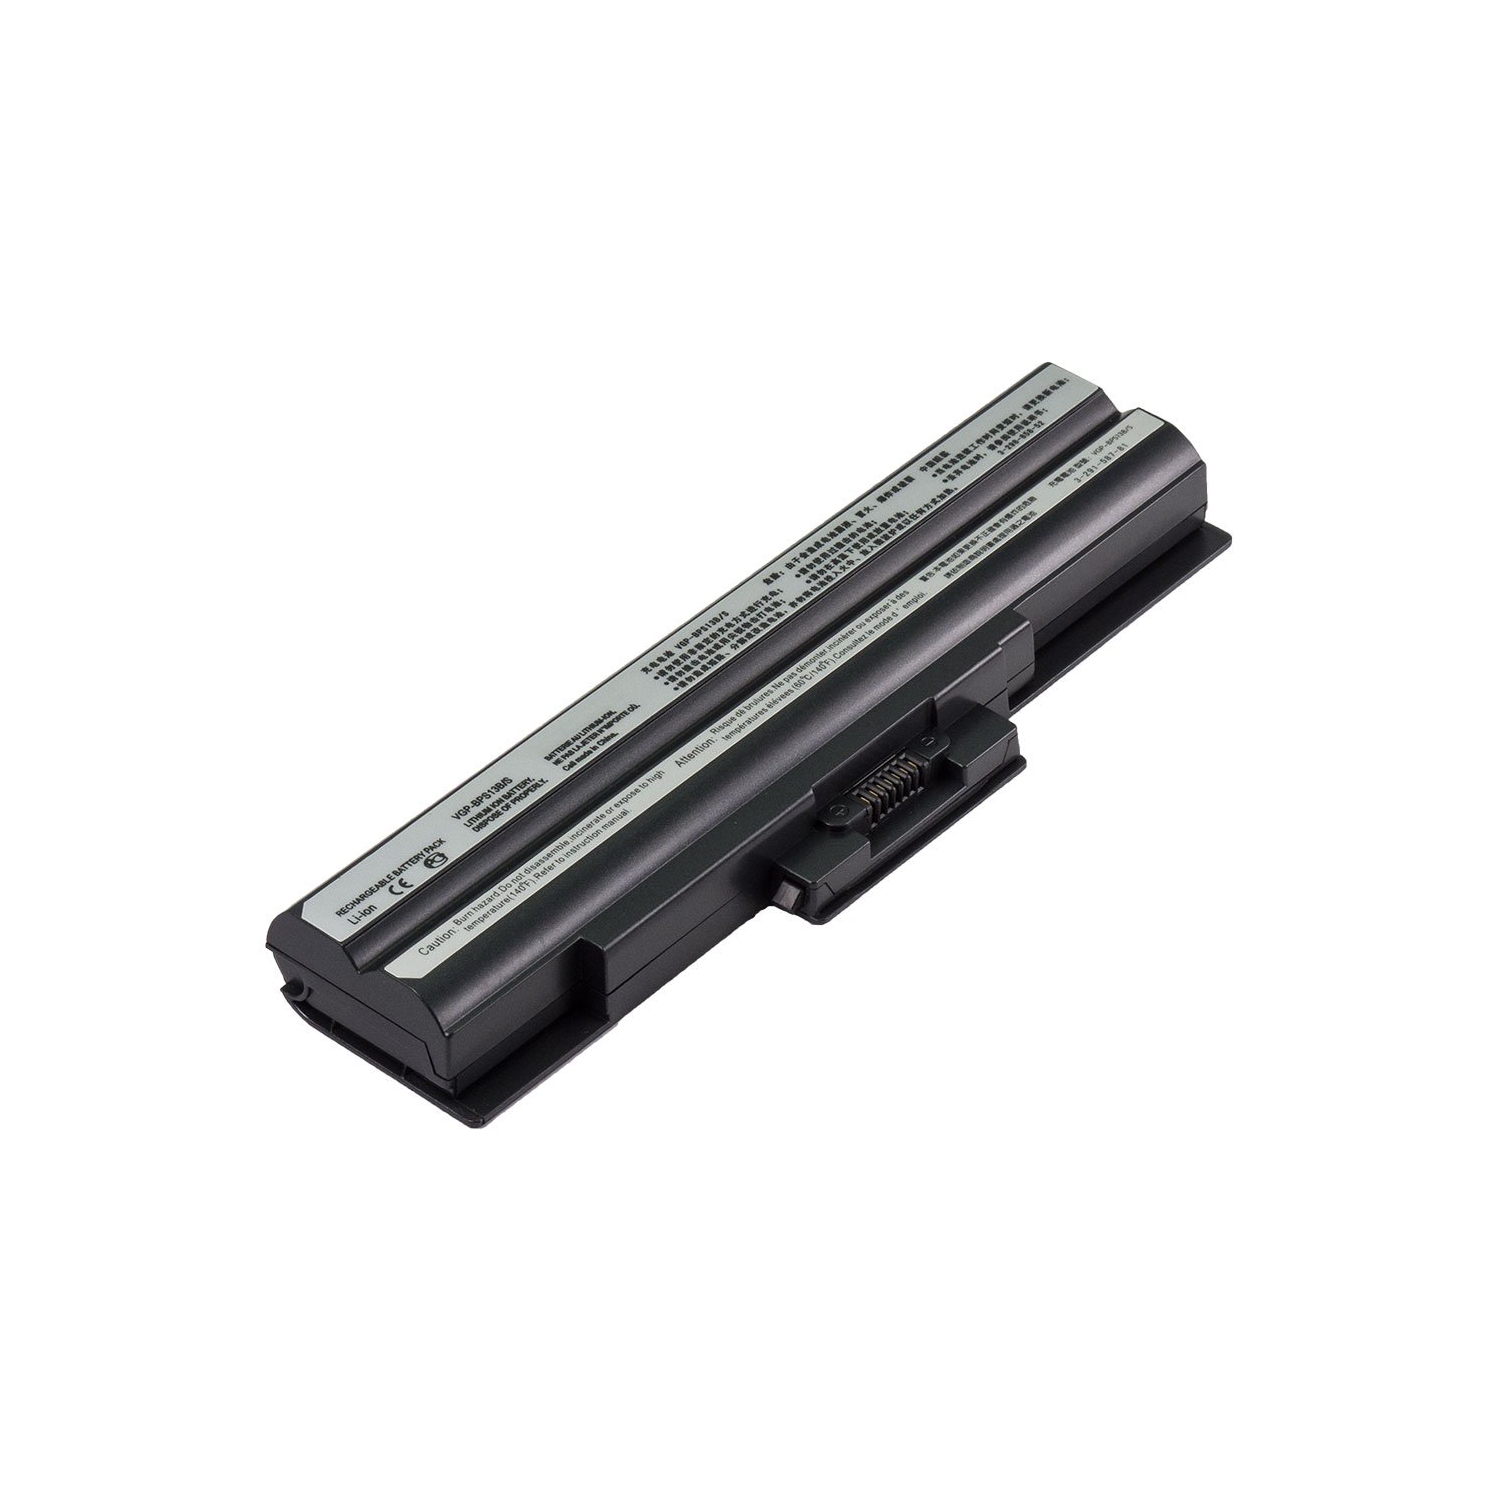 Laptop Battery Replacement for Sony VAIO VGN-SR210J, VGP-BPS13, VGP-BPS13/S, VGP-BPS13A/Q, VGP-BPS13B/B, VGP-BSP13/S